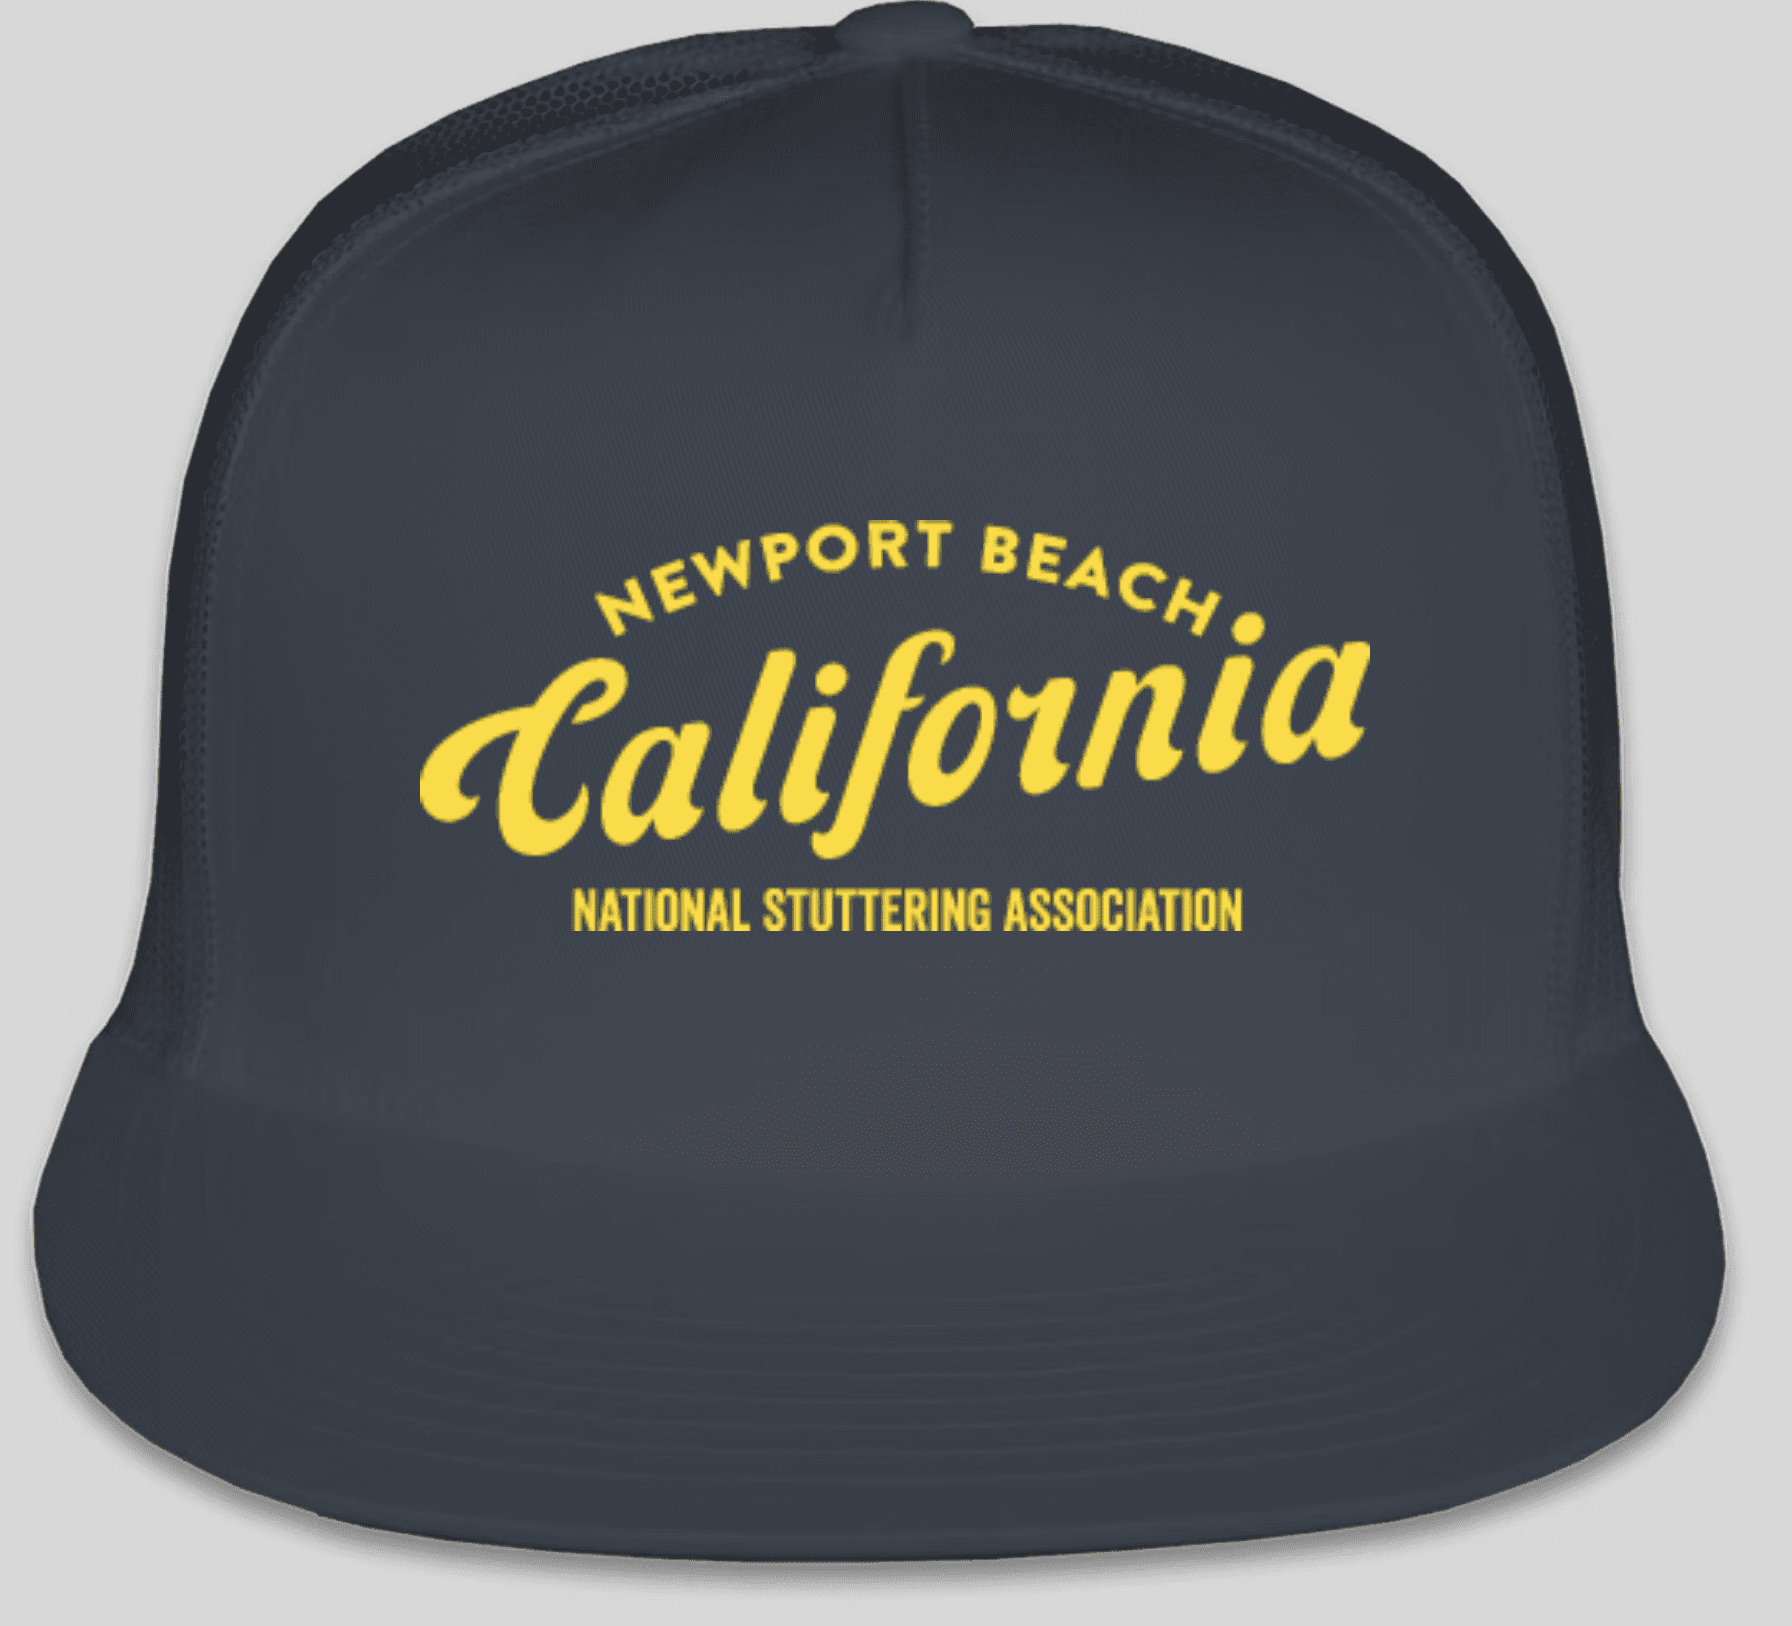 A navy blue baseball cap with "Stronger Together" in yellow script and "national stuttering association" in white text below, centered on the front panel.